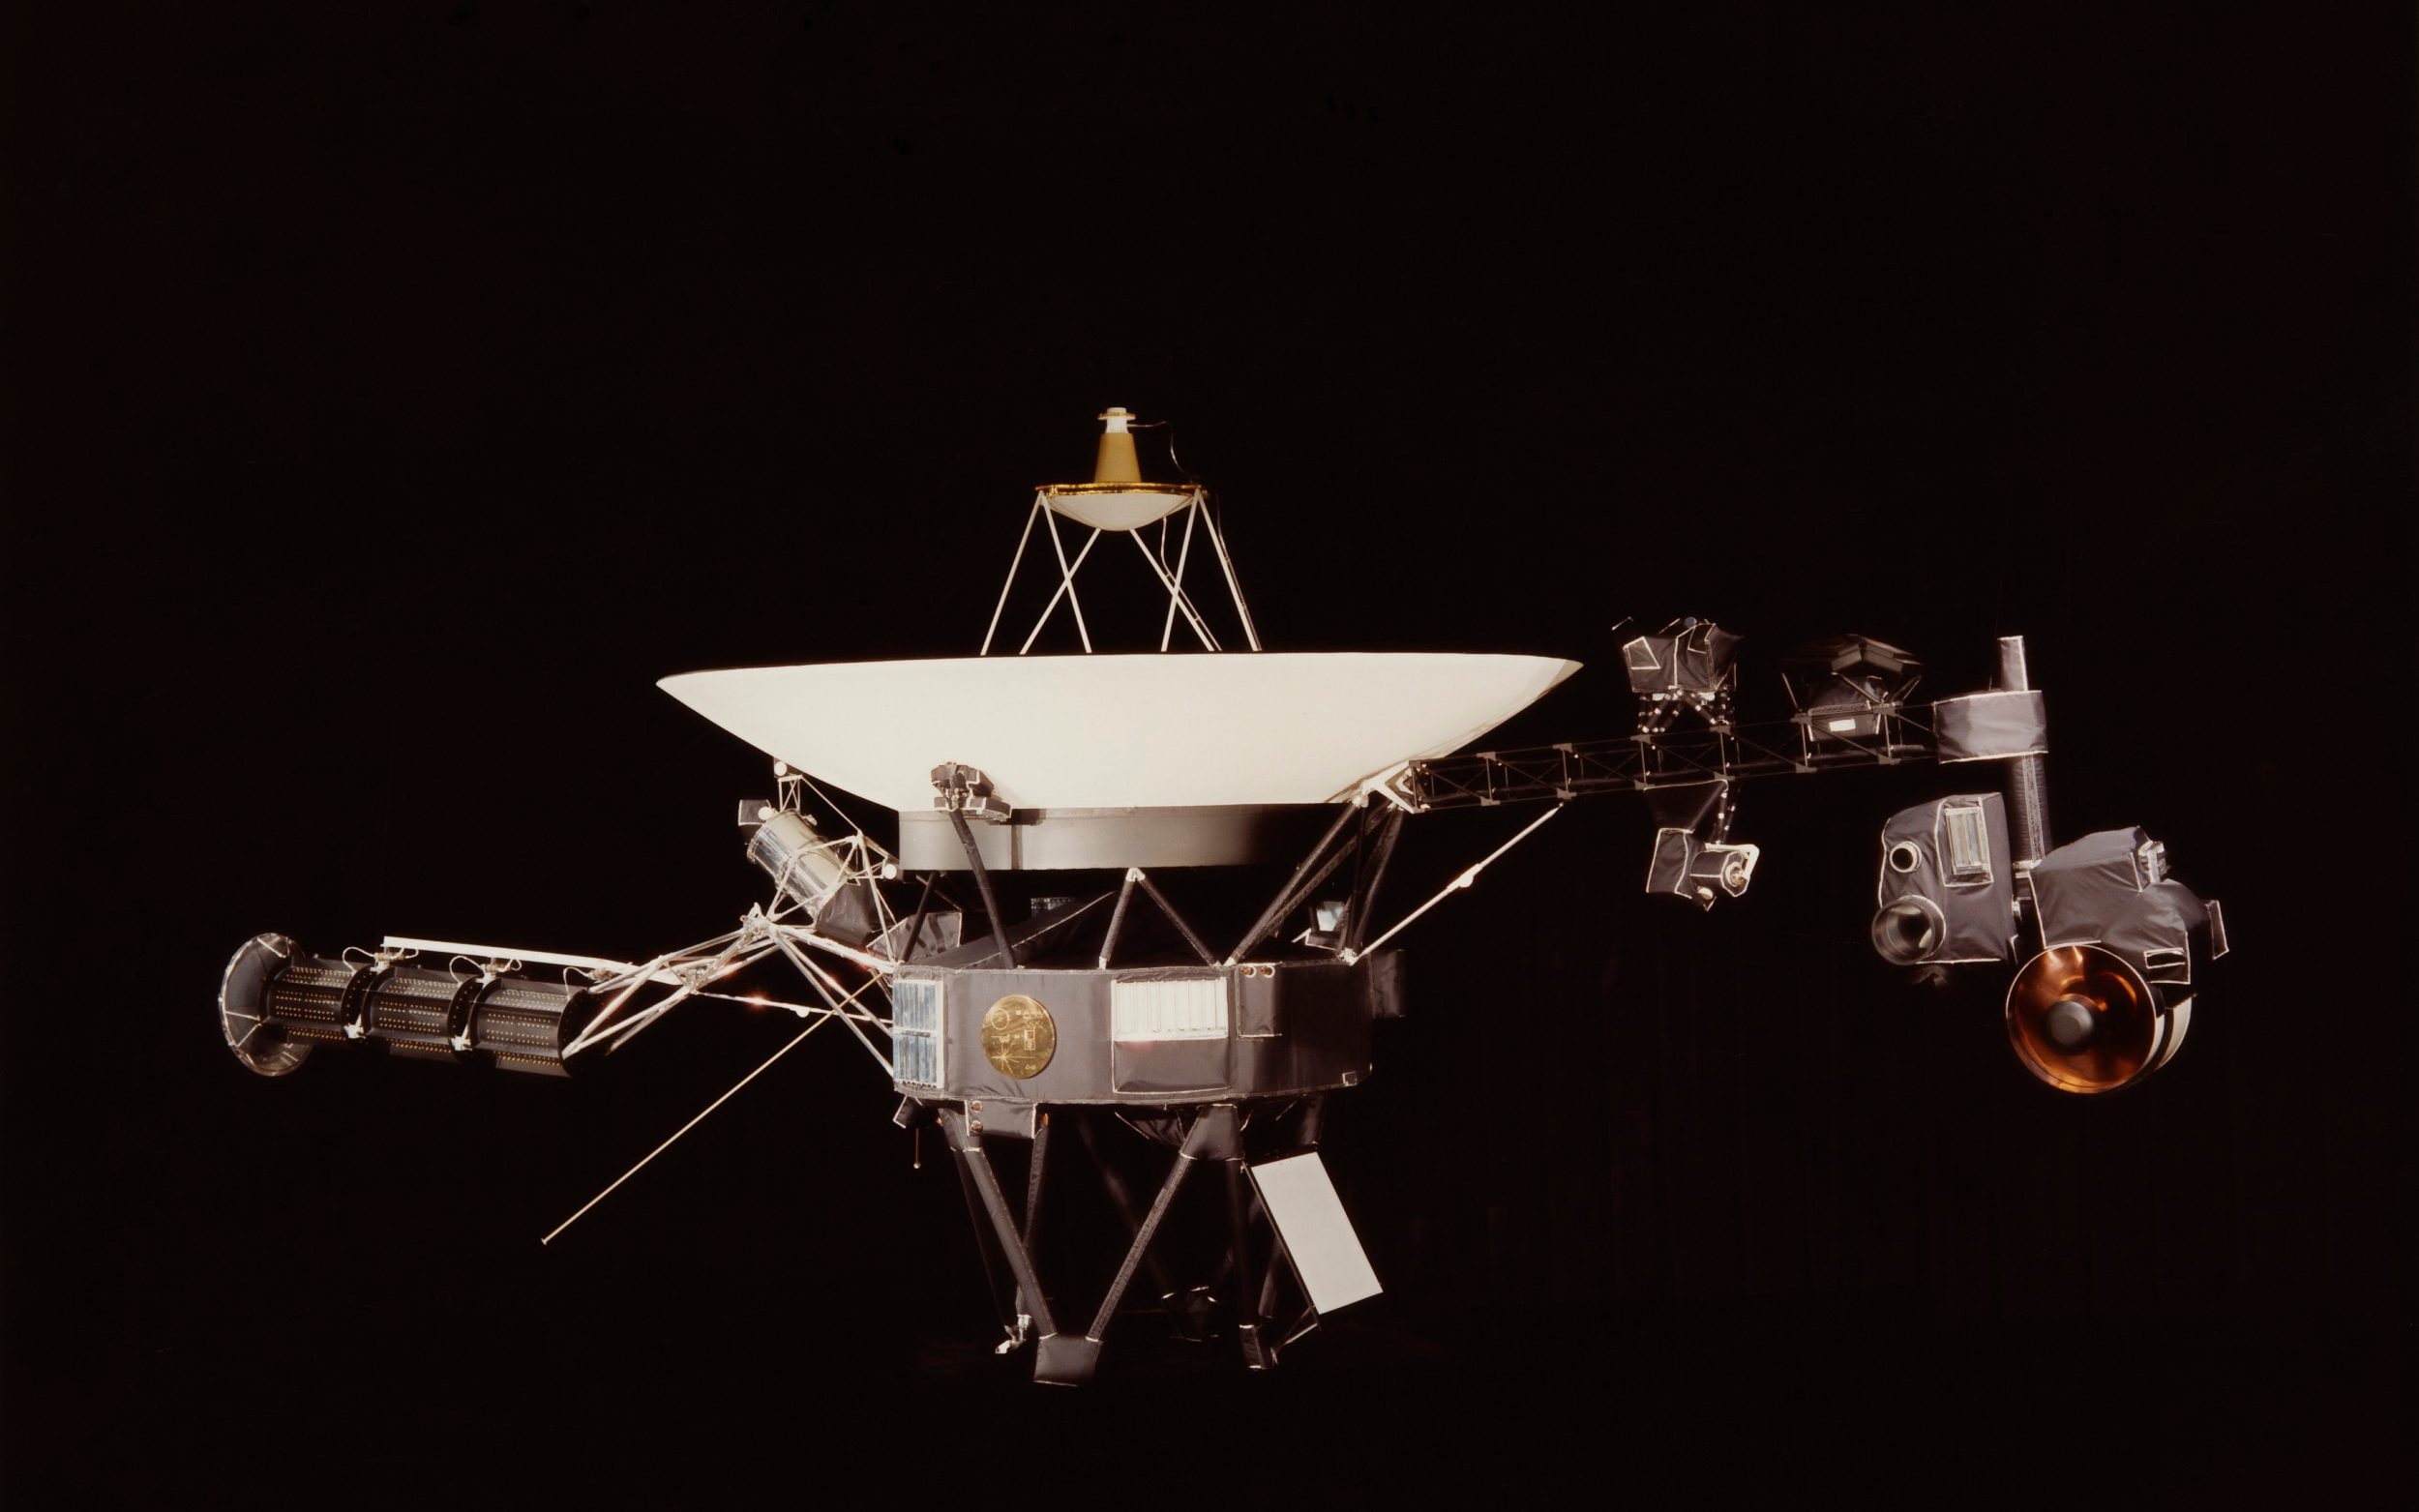 nasa engineers bring voyager 1 back to life after interstellar glitch